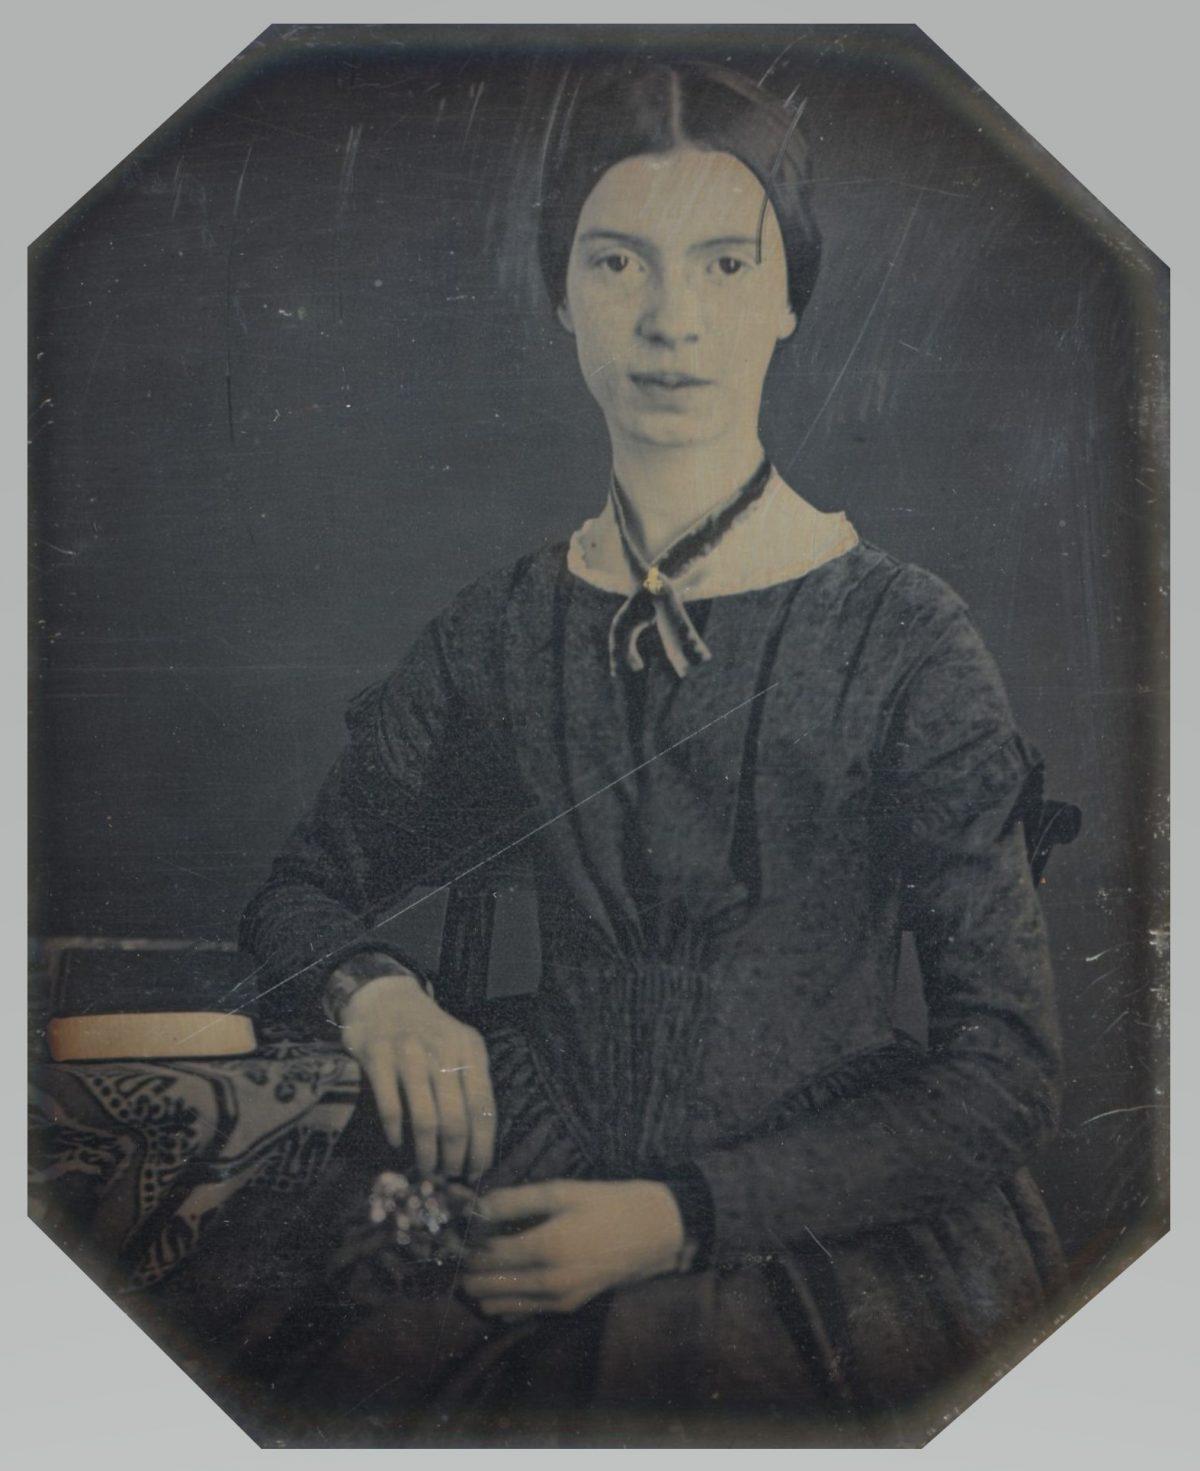 A daguerreotype taken Dec. 1846 or early 1847; the only authenticated portrait of Emily Dickinson after childhood. Amherst College Archives & Special Collections. (Public Domain)